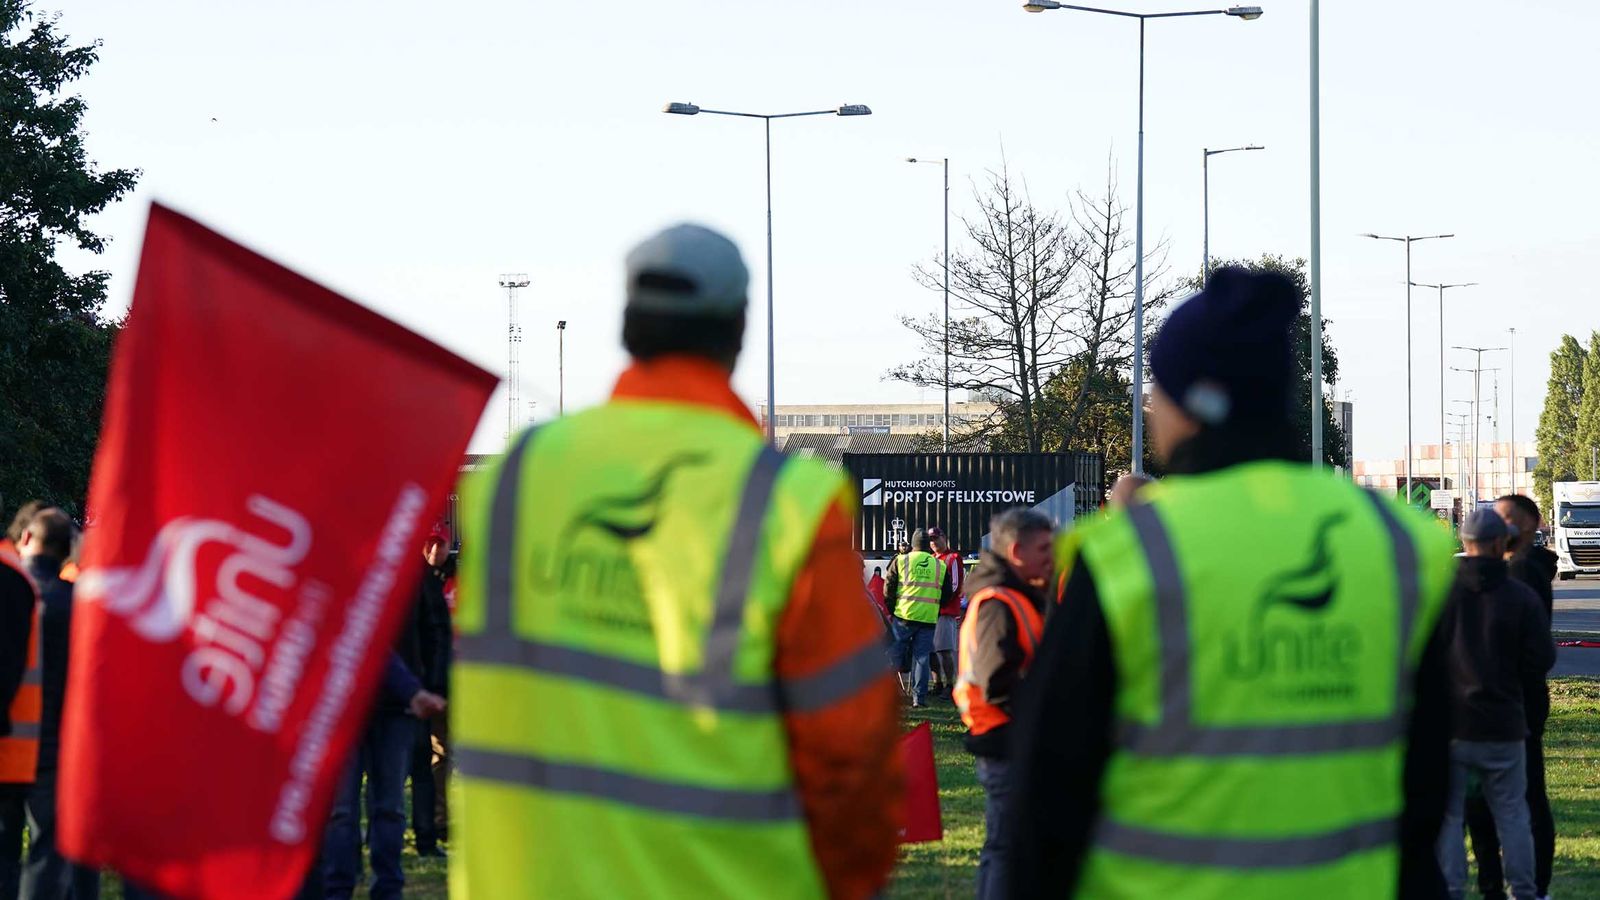 Trade union Unite severs ties with long-term supplier over criminality concerns